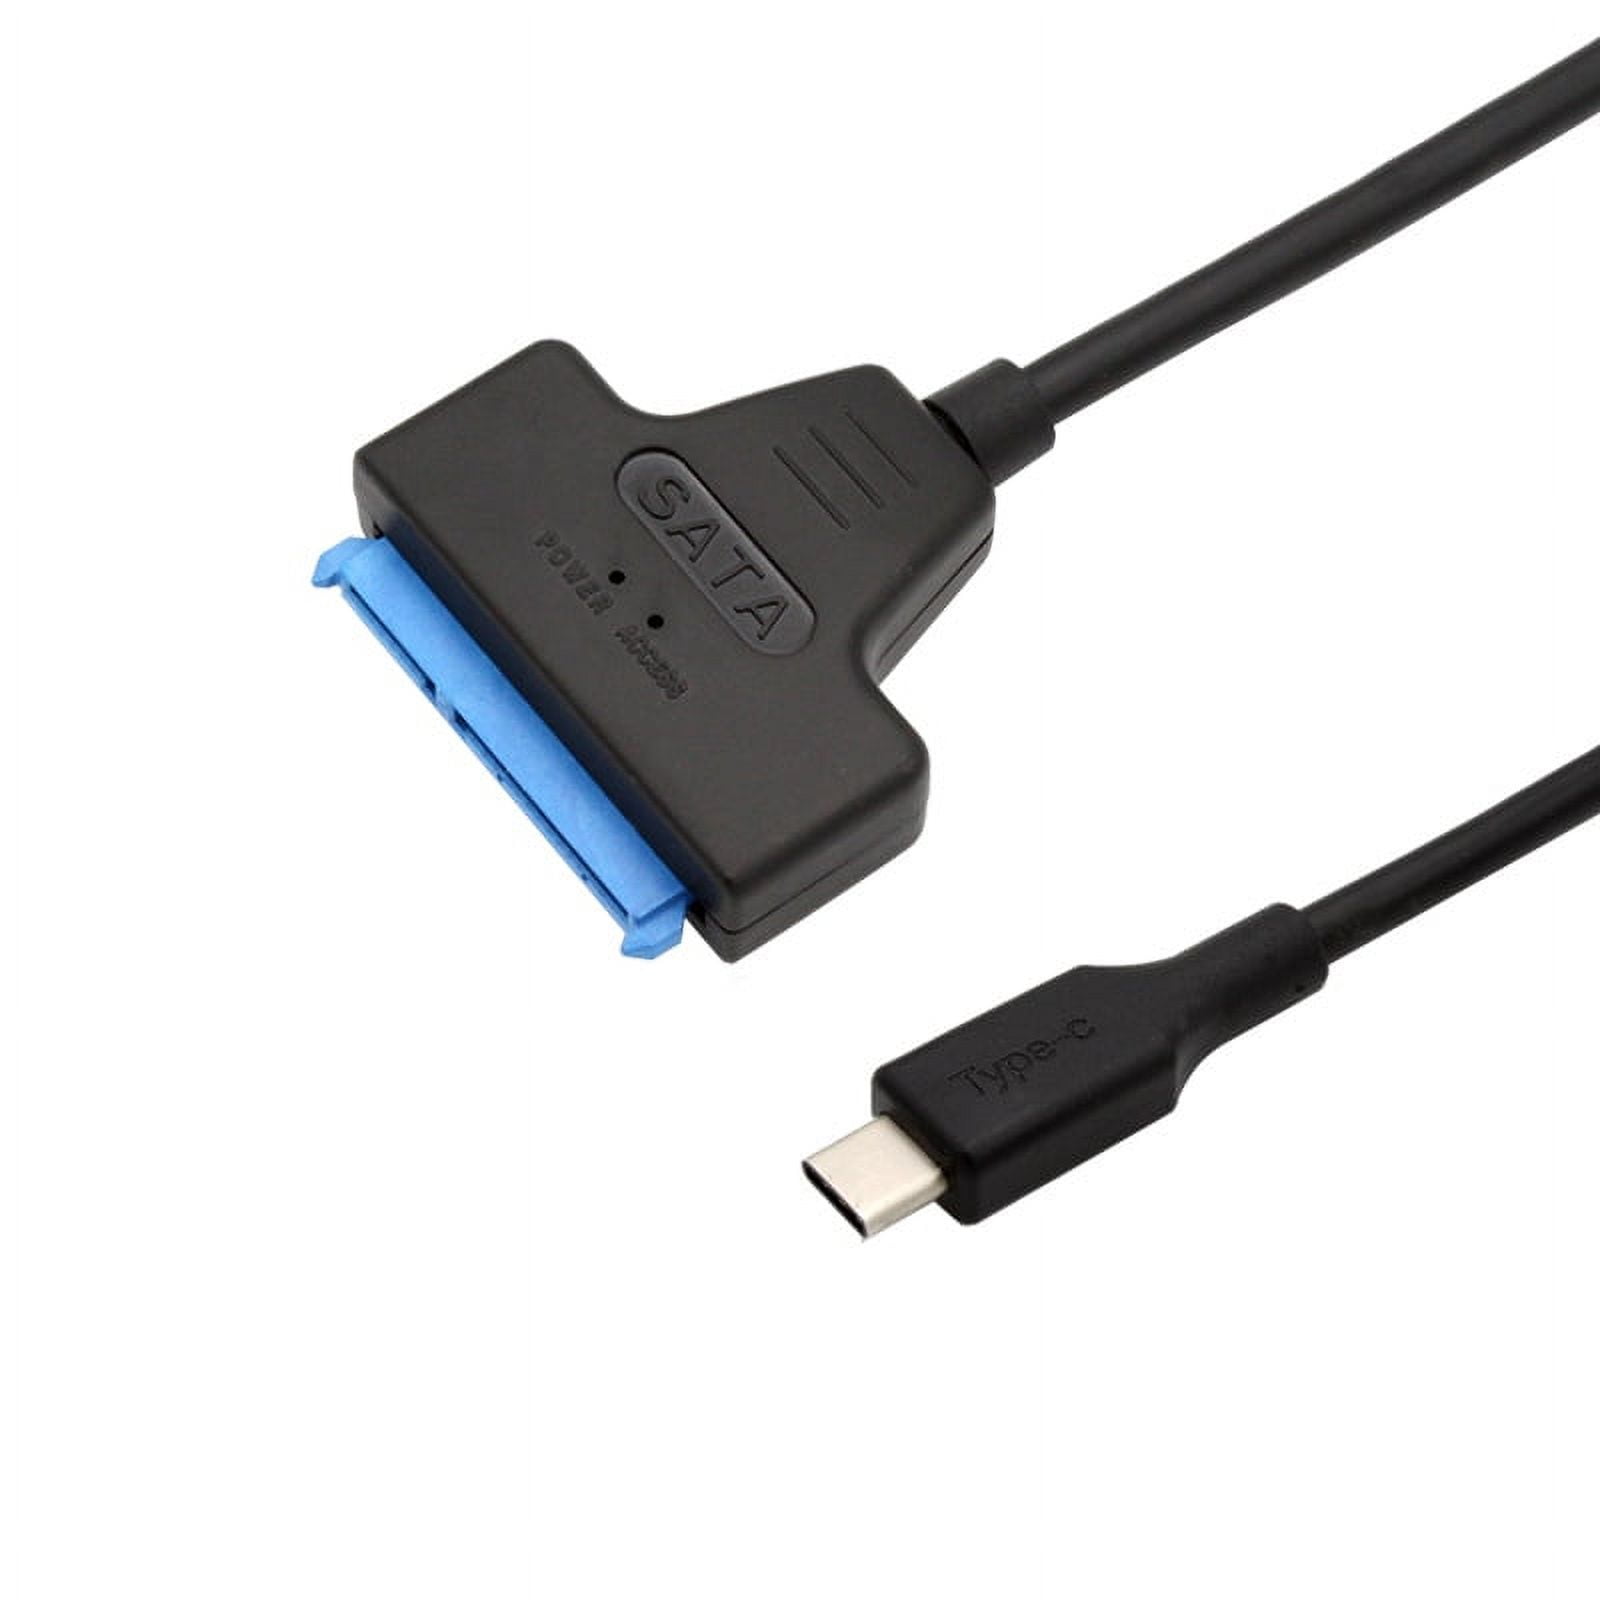 USB 3.1 (10Gbps) Adapter Cable - Drive Adapters and Drive Converters, Hard  Drive Accessories